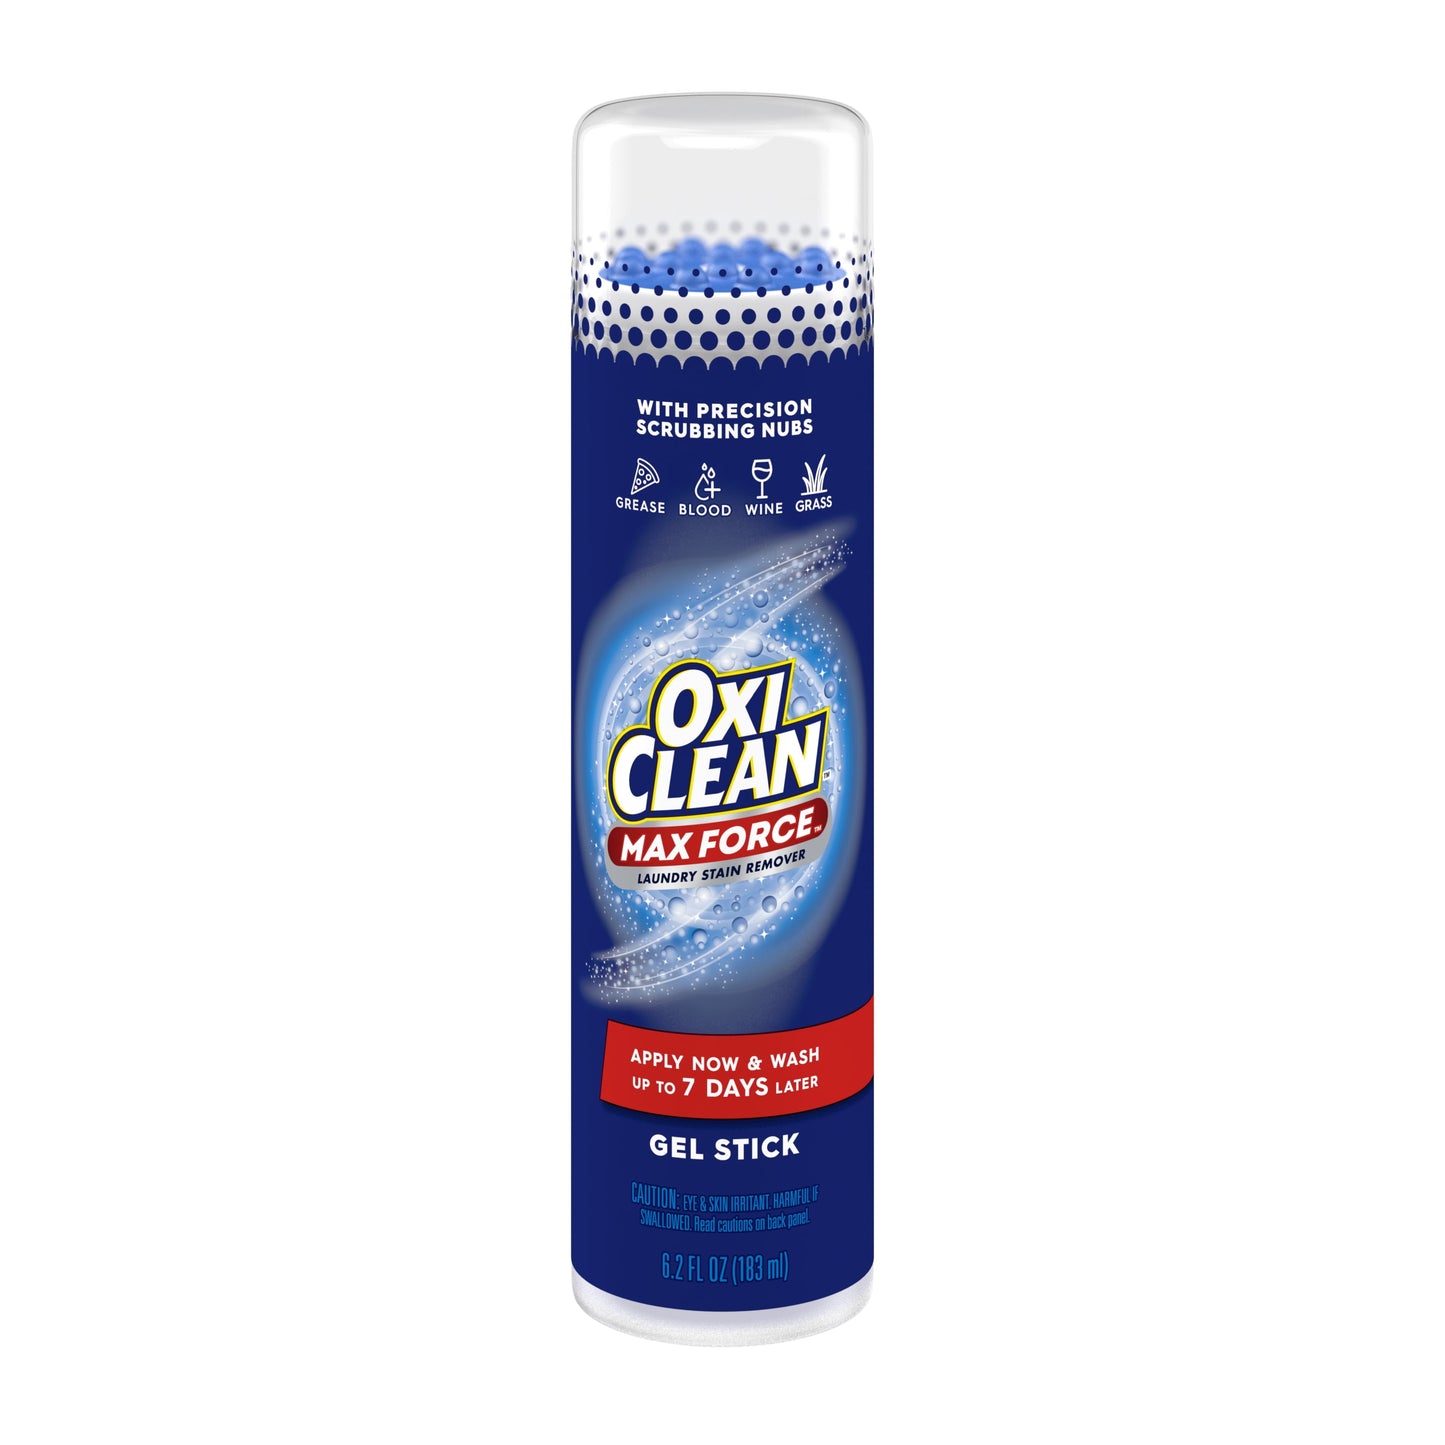 OxiClean Max Force Laundry Stain Remover Gel Stick, 6.2 fl oz